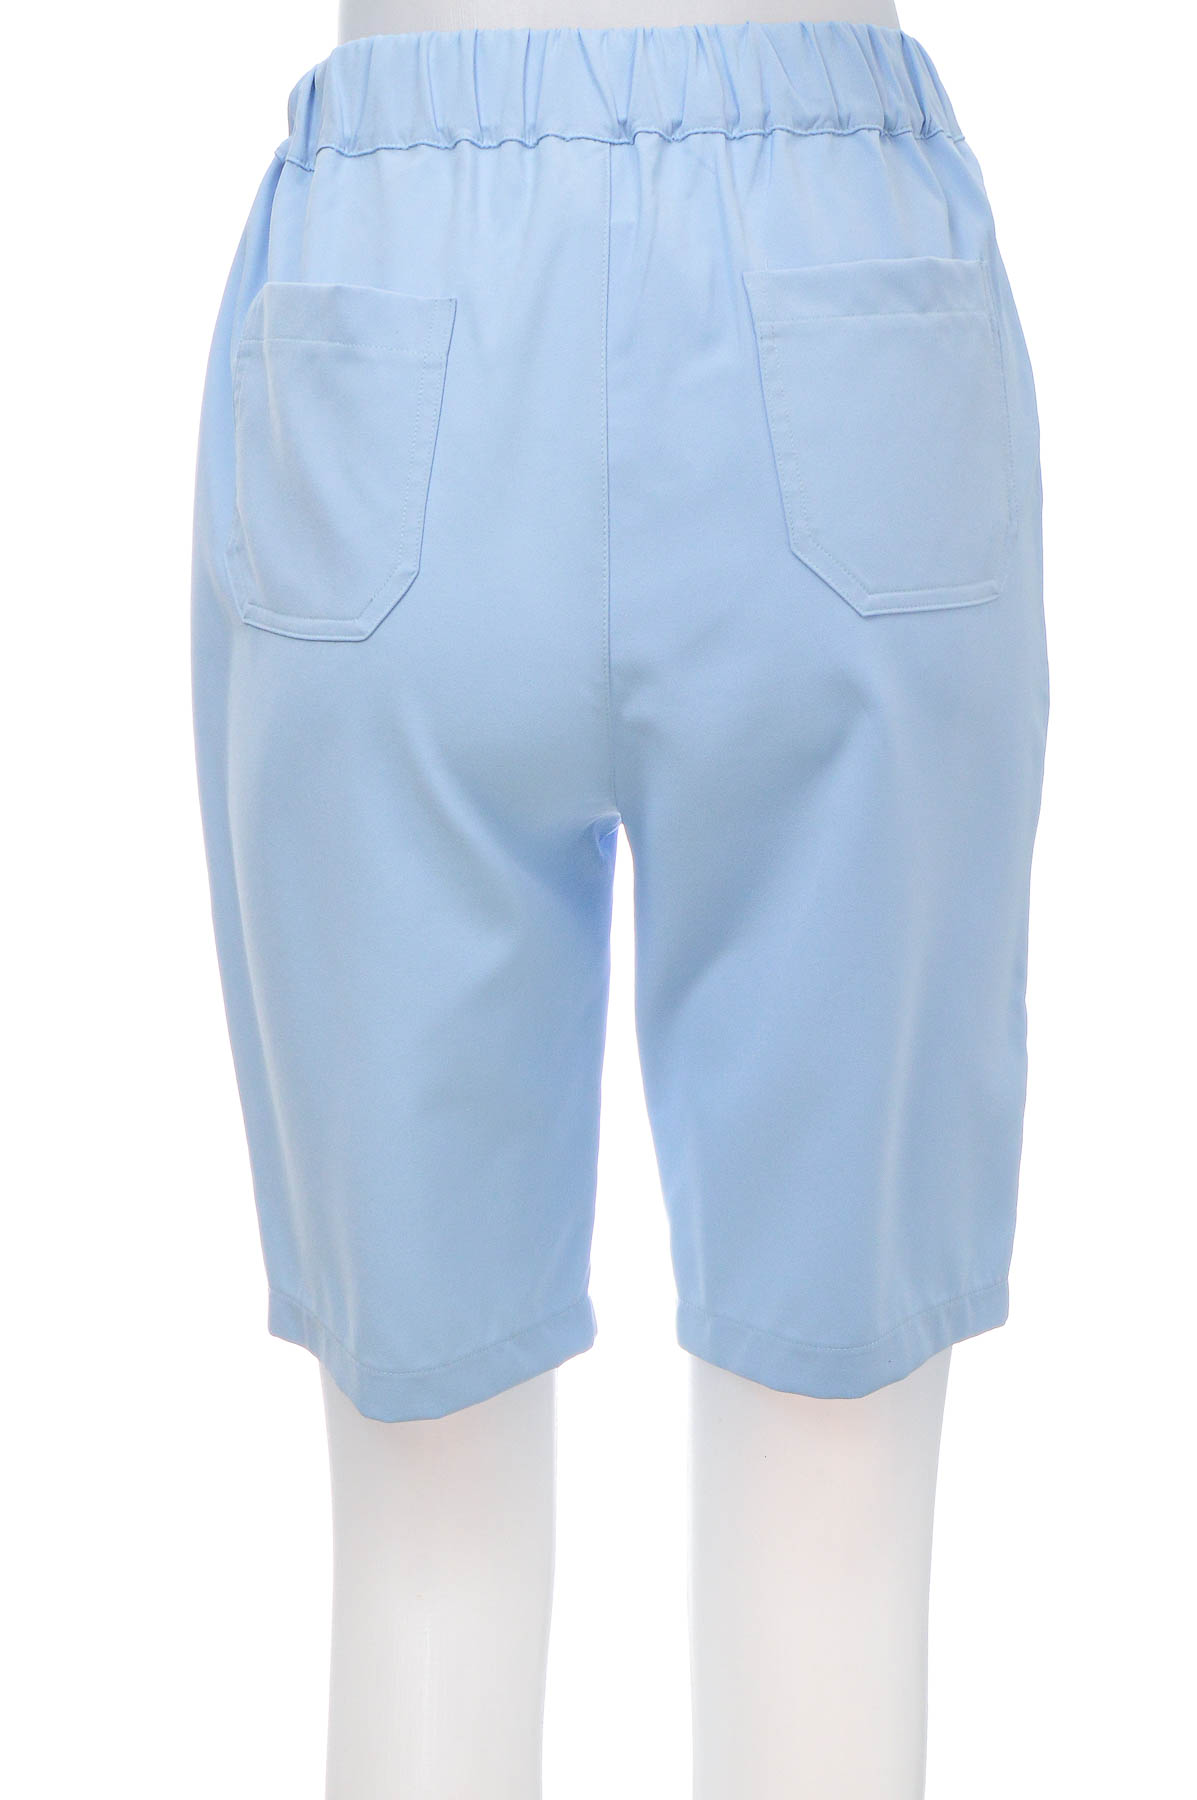 Shorts for girls - CACHE CACHE - 1